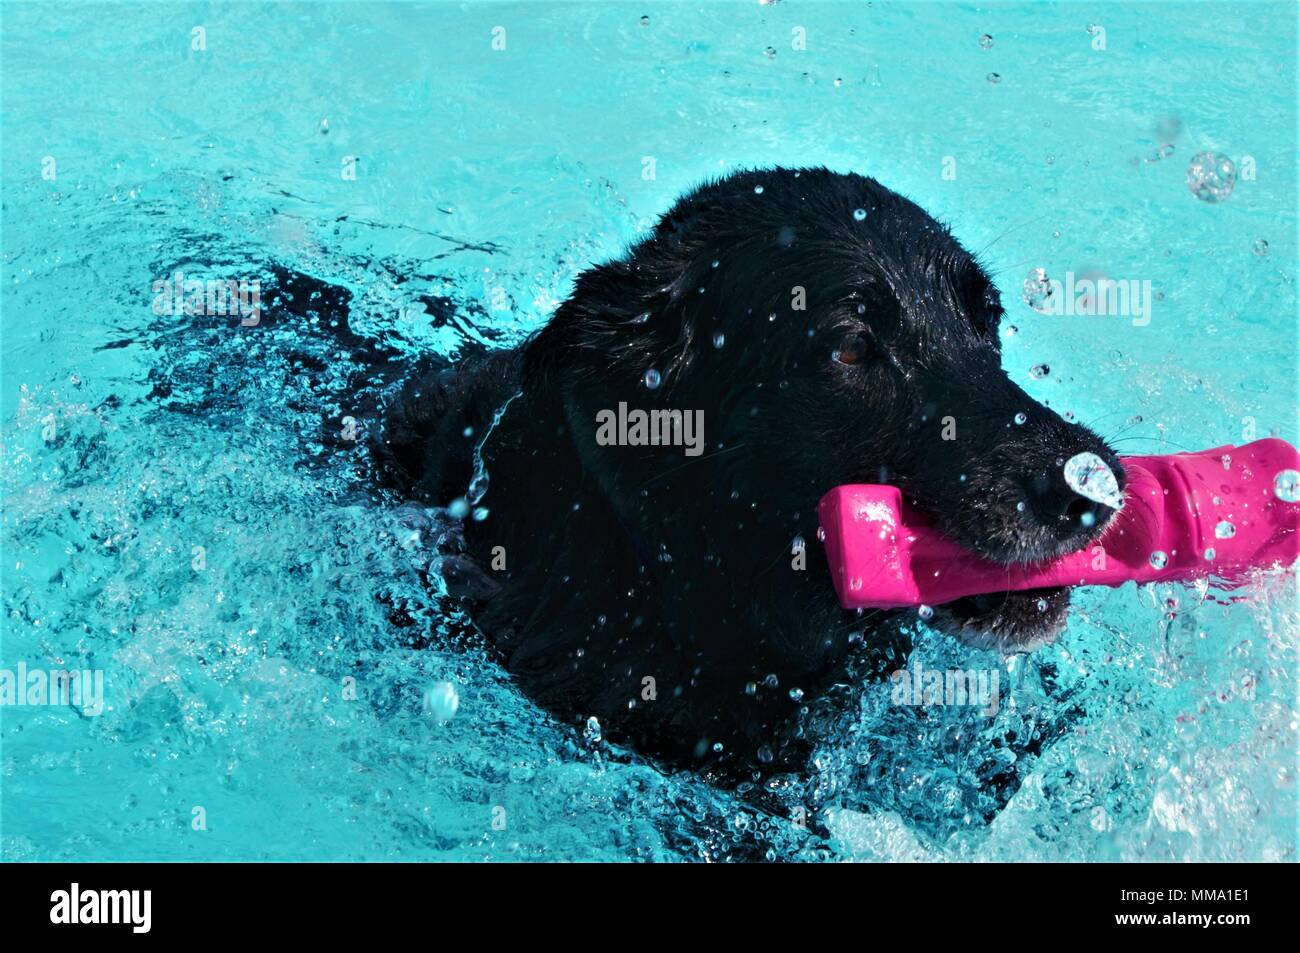 Kiley, a black Labrador retriever, catches a play toy in the pool during the third annual Doggy Swim Day September 23, 2017 at the Fort Bliss Community Pool. Kiley is the pet of Sarrah Morgan, the event coordinator for Doggy Swim Day. (Army Photo by SGT Apryl N. Bowman, 24th Press Camp Headquarters) Stock Photo